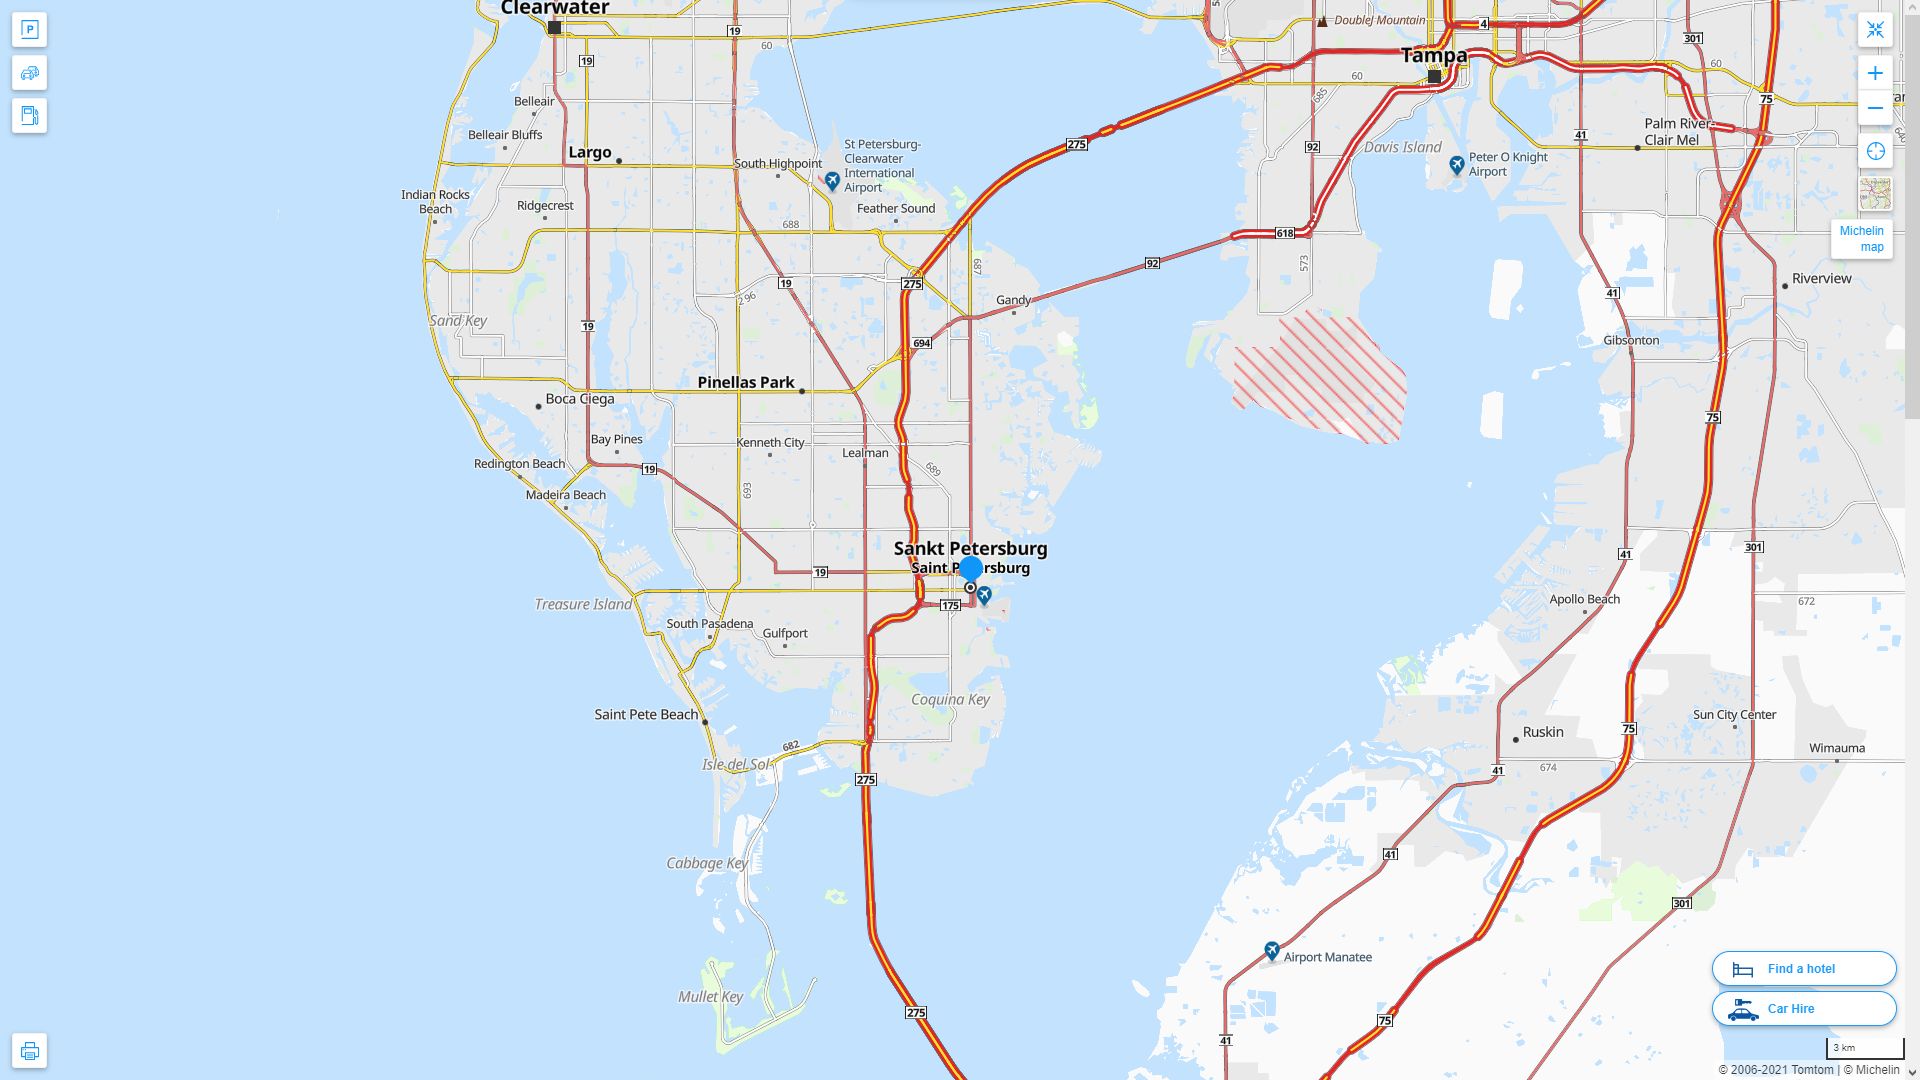 St. Petersburg Florida Highway and Road Map